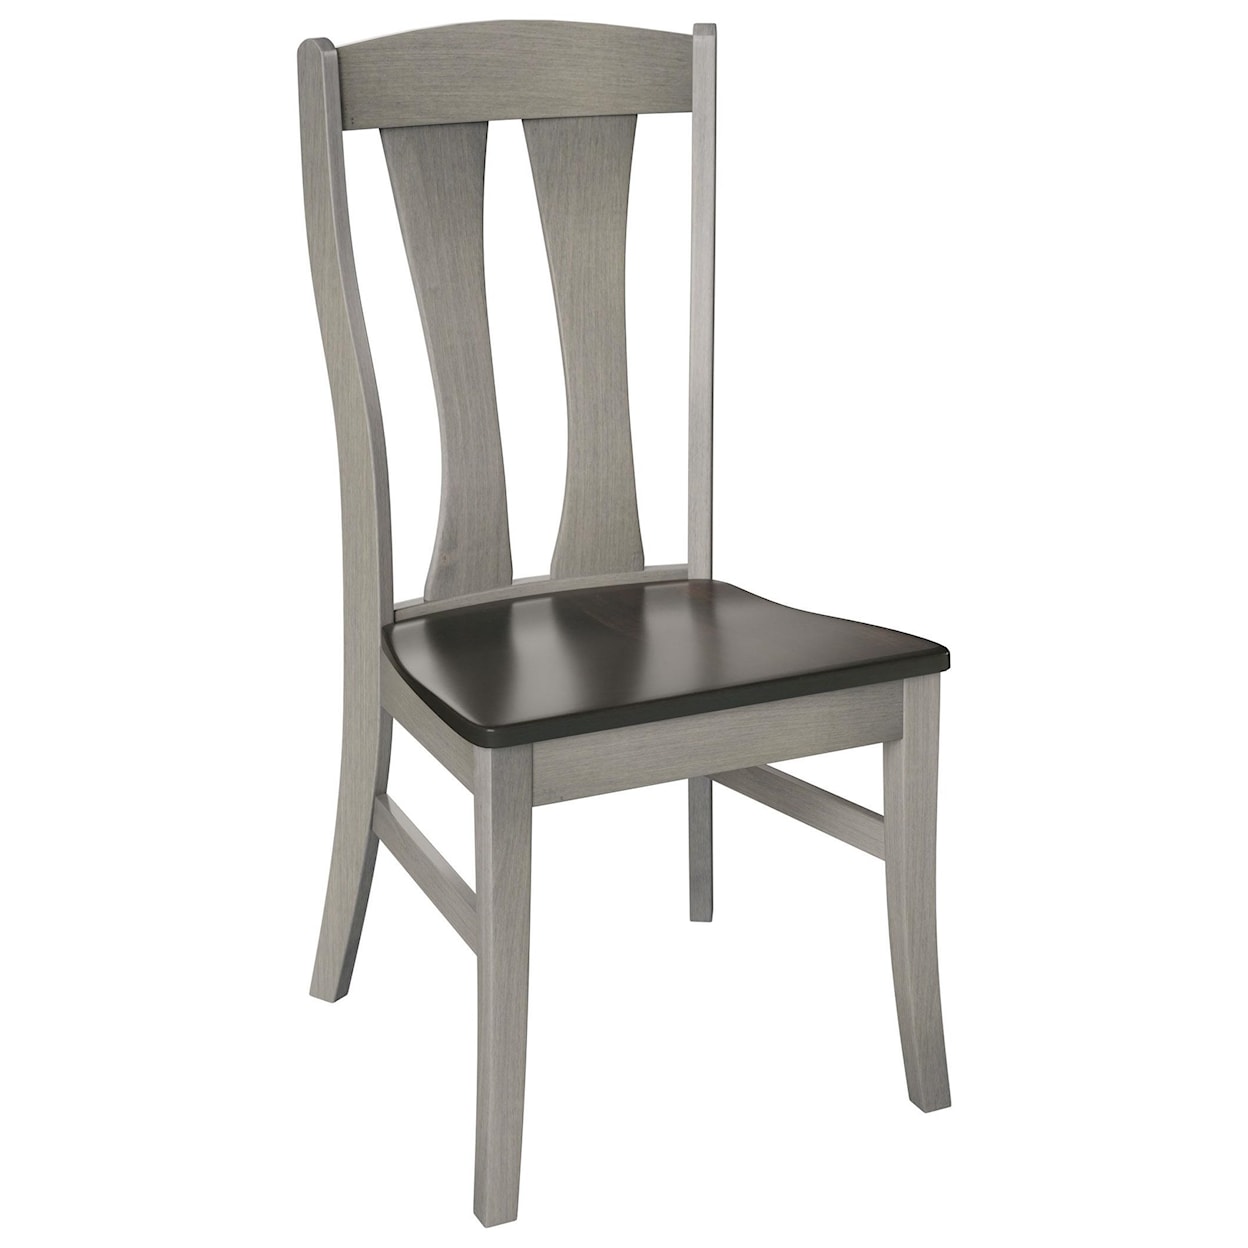 Wengerd Wood Products Arnica Side Chair